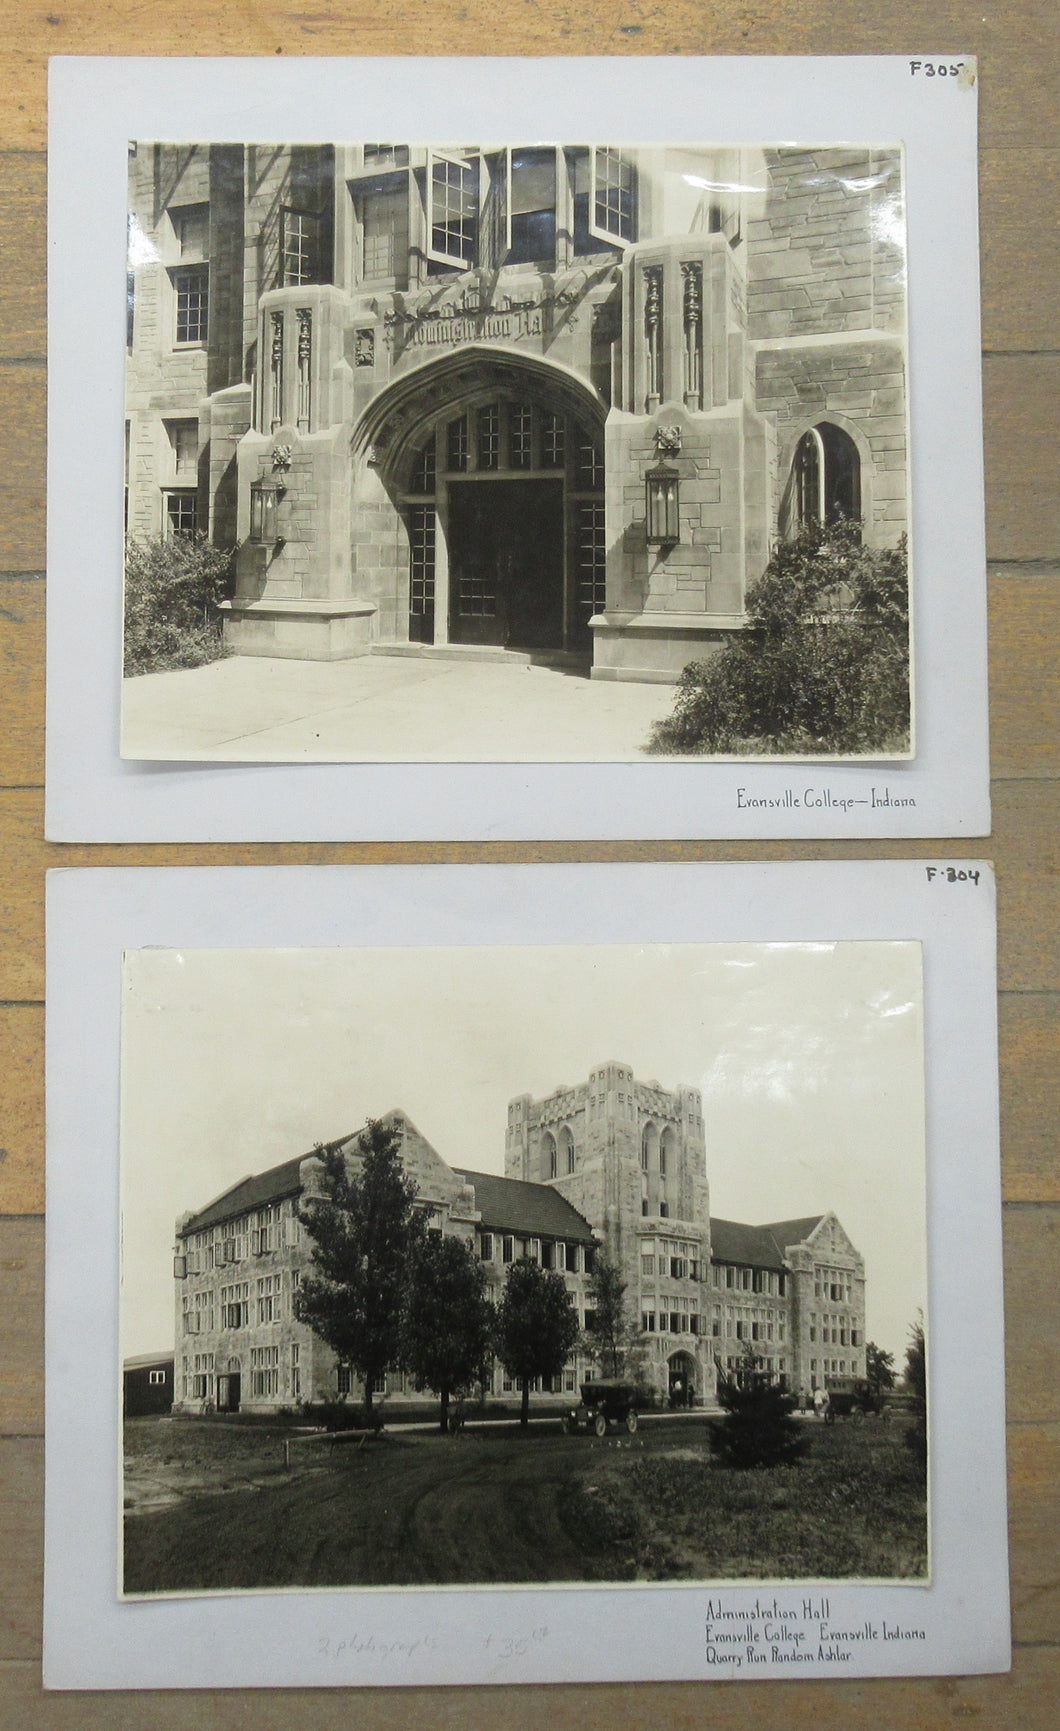 Two photos of Evansville College, Indiana